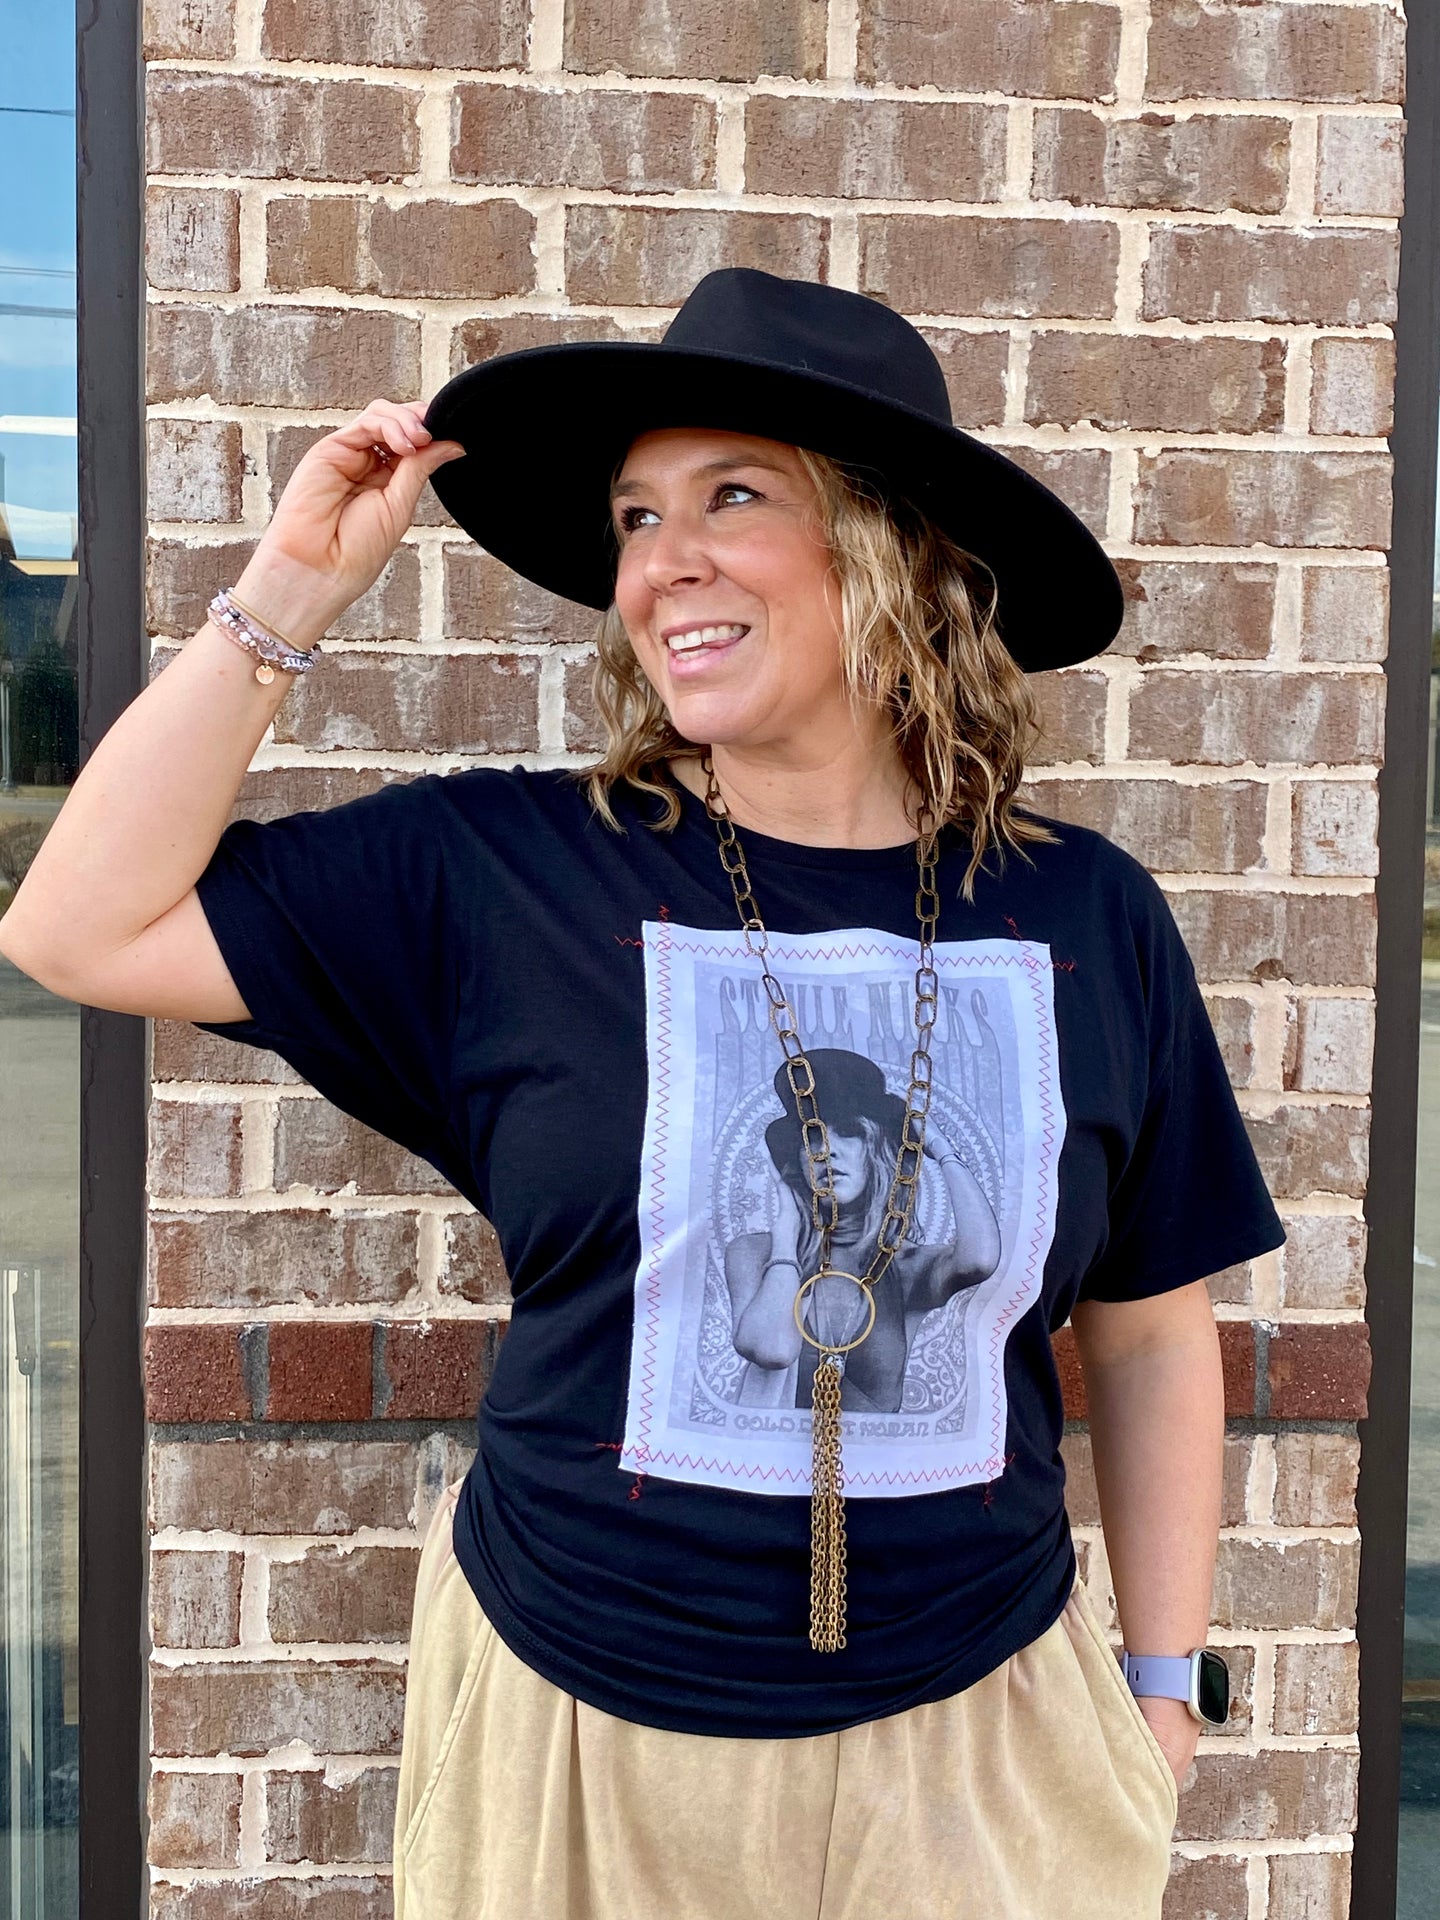 The Stevie Nicks Red Stitch Graphic Tee will have you fulfilling your Stevie Dreams. The Black and White portrait of Stevie is framed in an oversized red stitching. This oversize tee is soft and comfy, where tied with a jacket or flannel to complete your look!